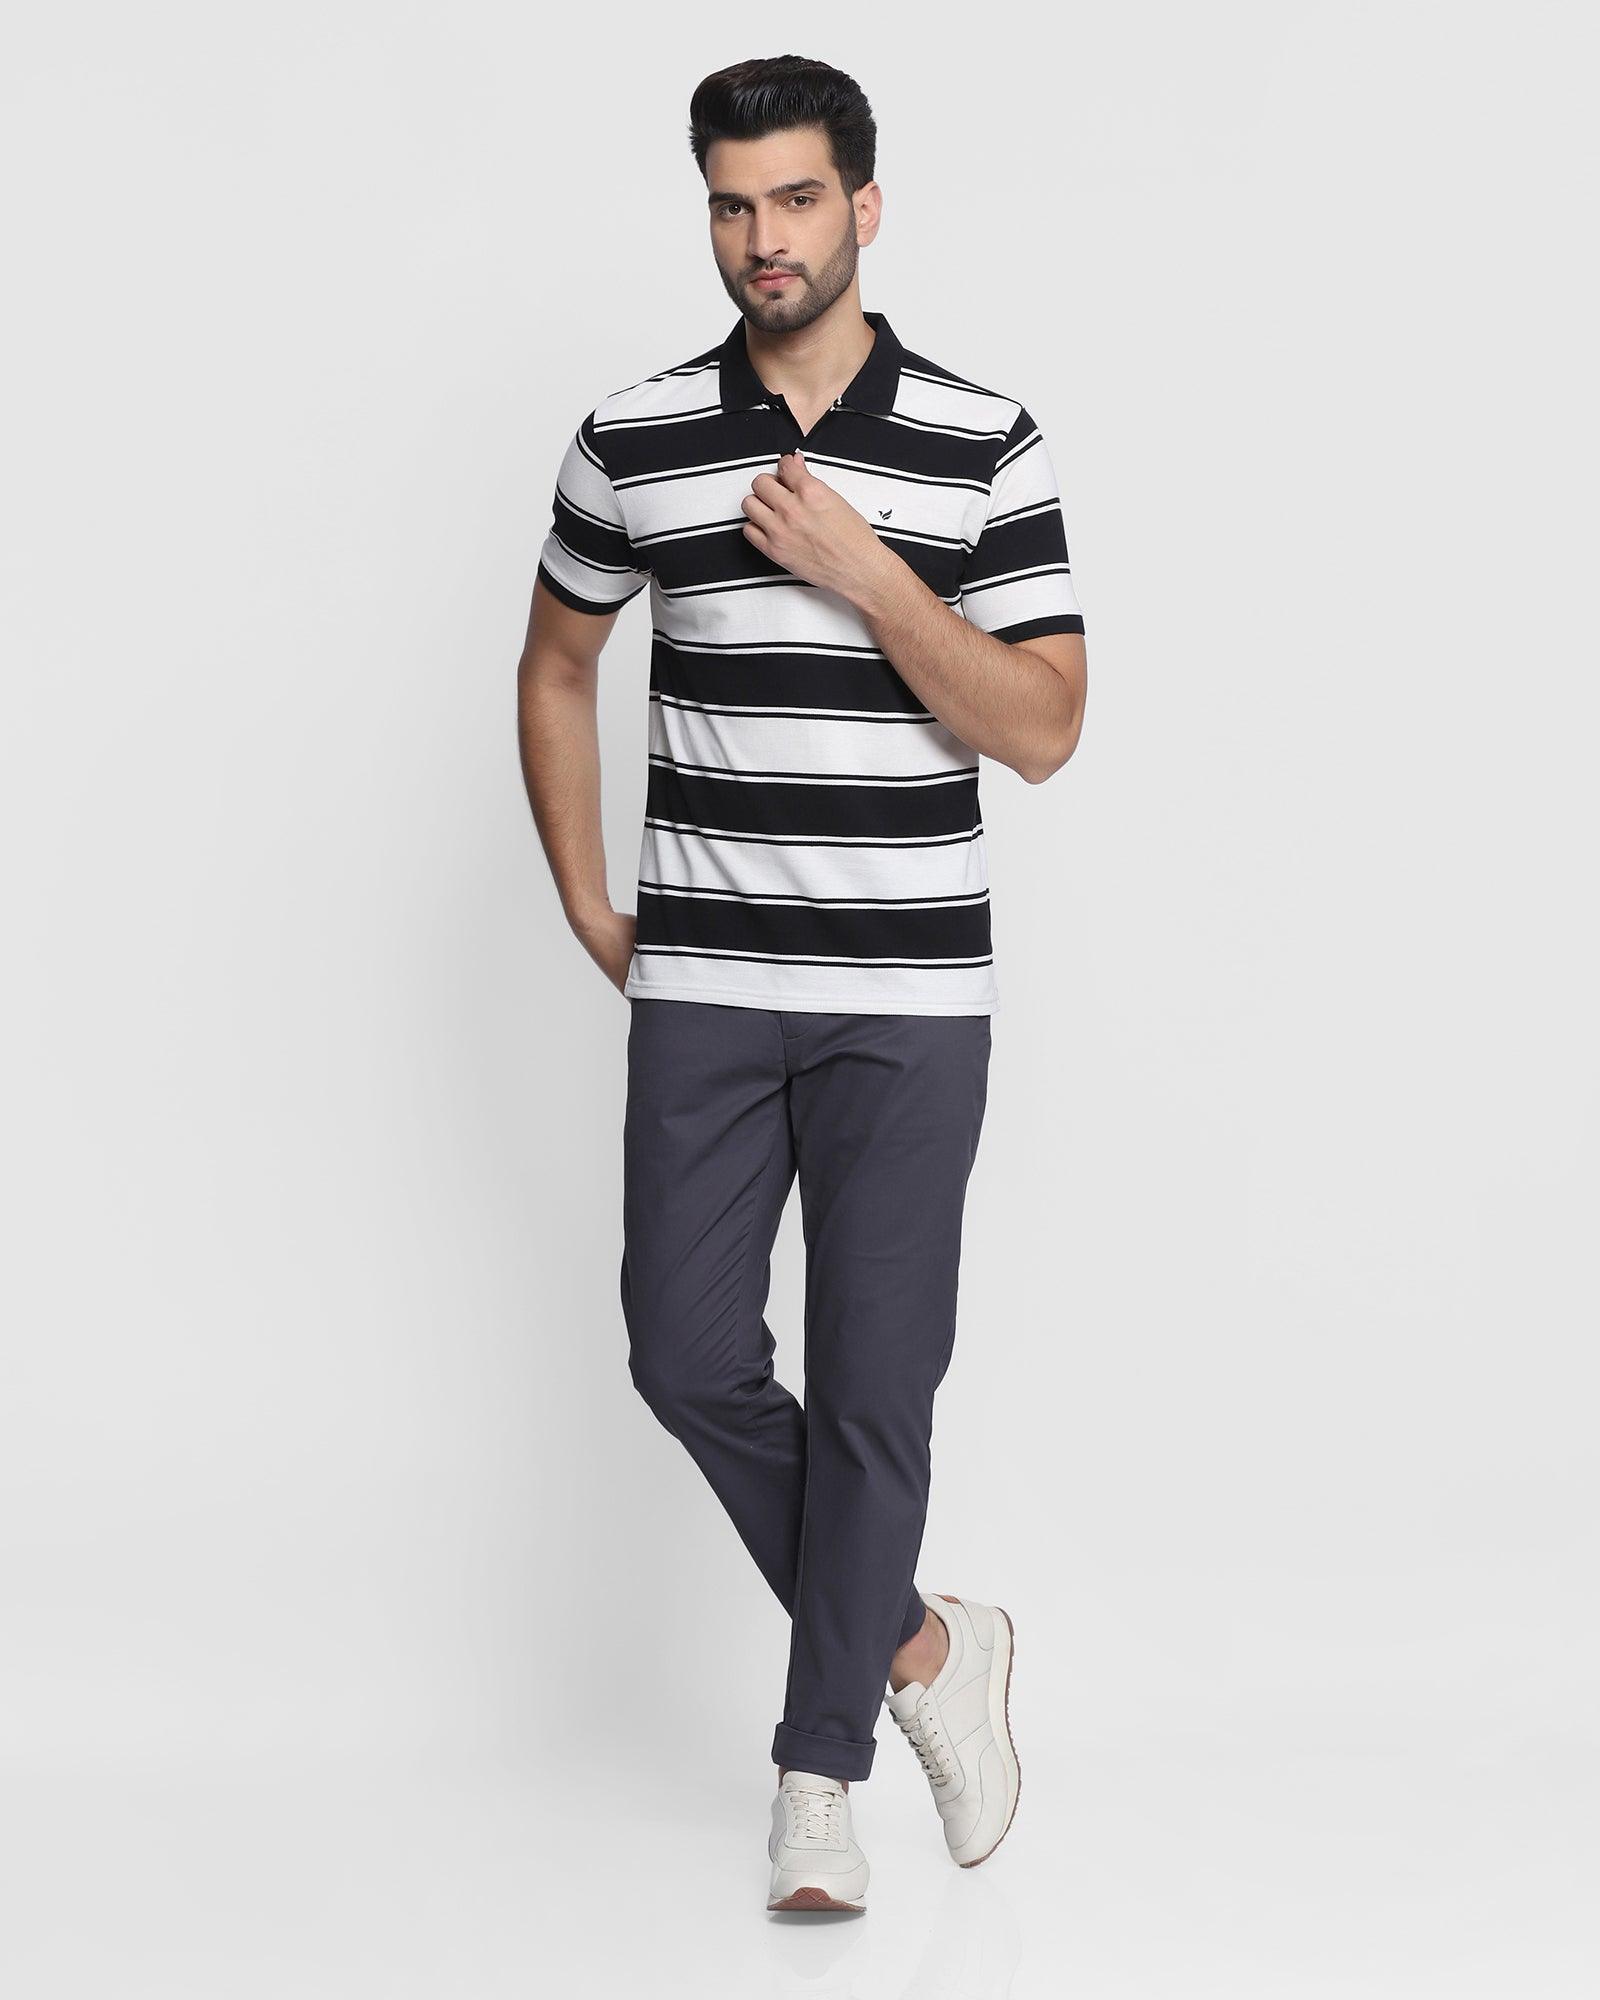 Polo Jet Black Striped T Shirt - Rugby